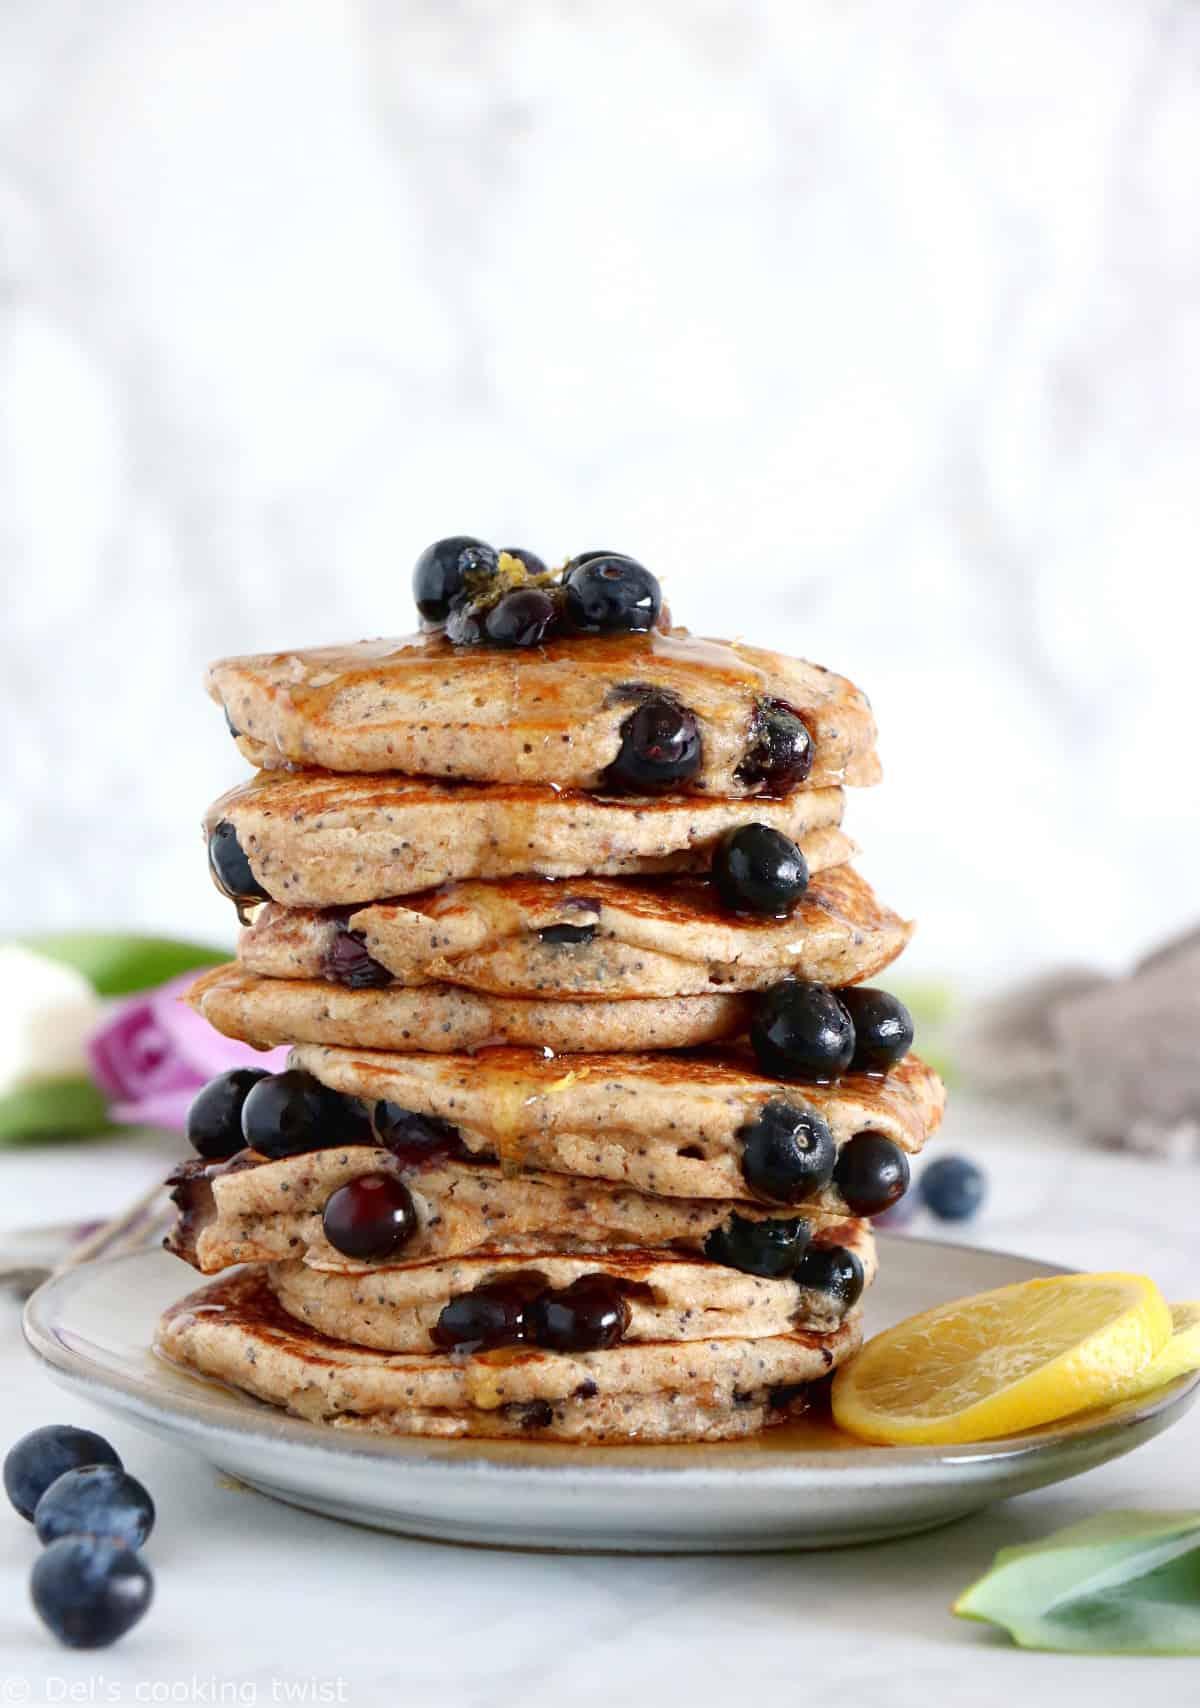 These lemon poppy seed blueberry pancakes are sugar-free, packed with fruits and prepared with whole-wheat flour.